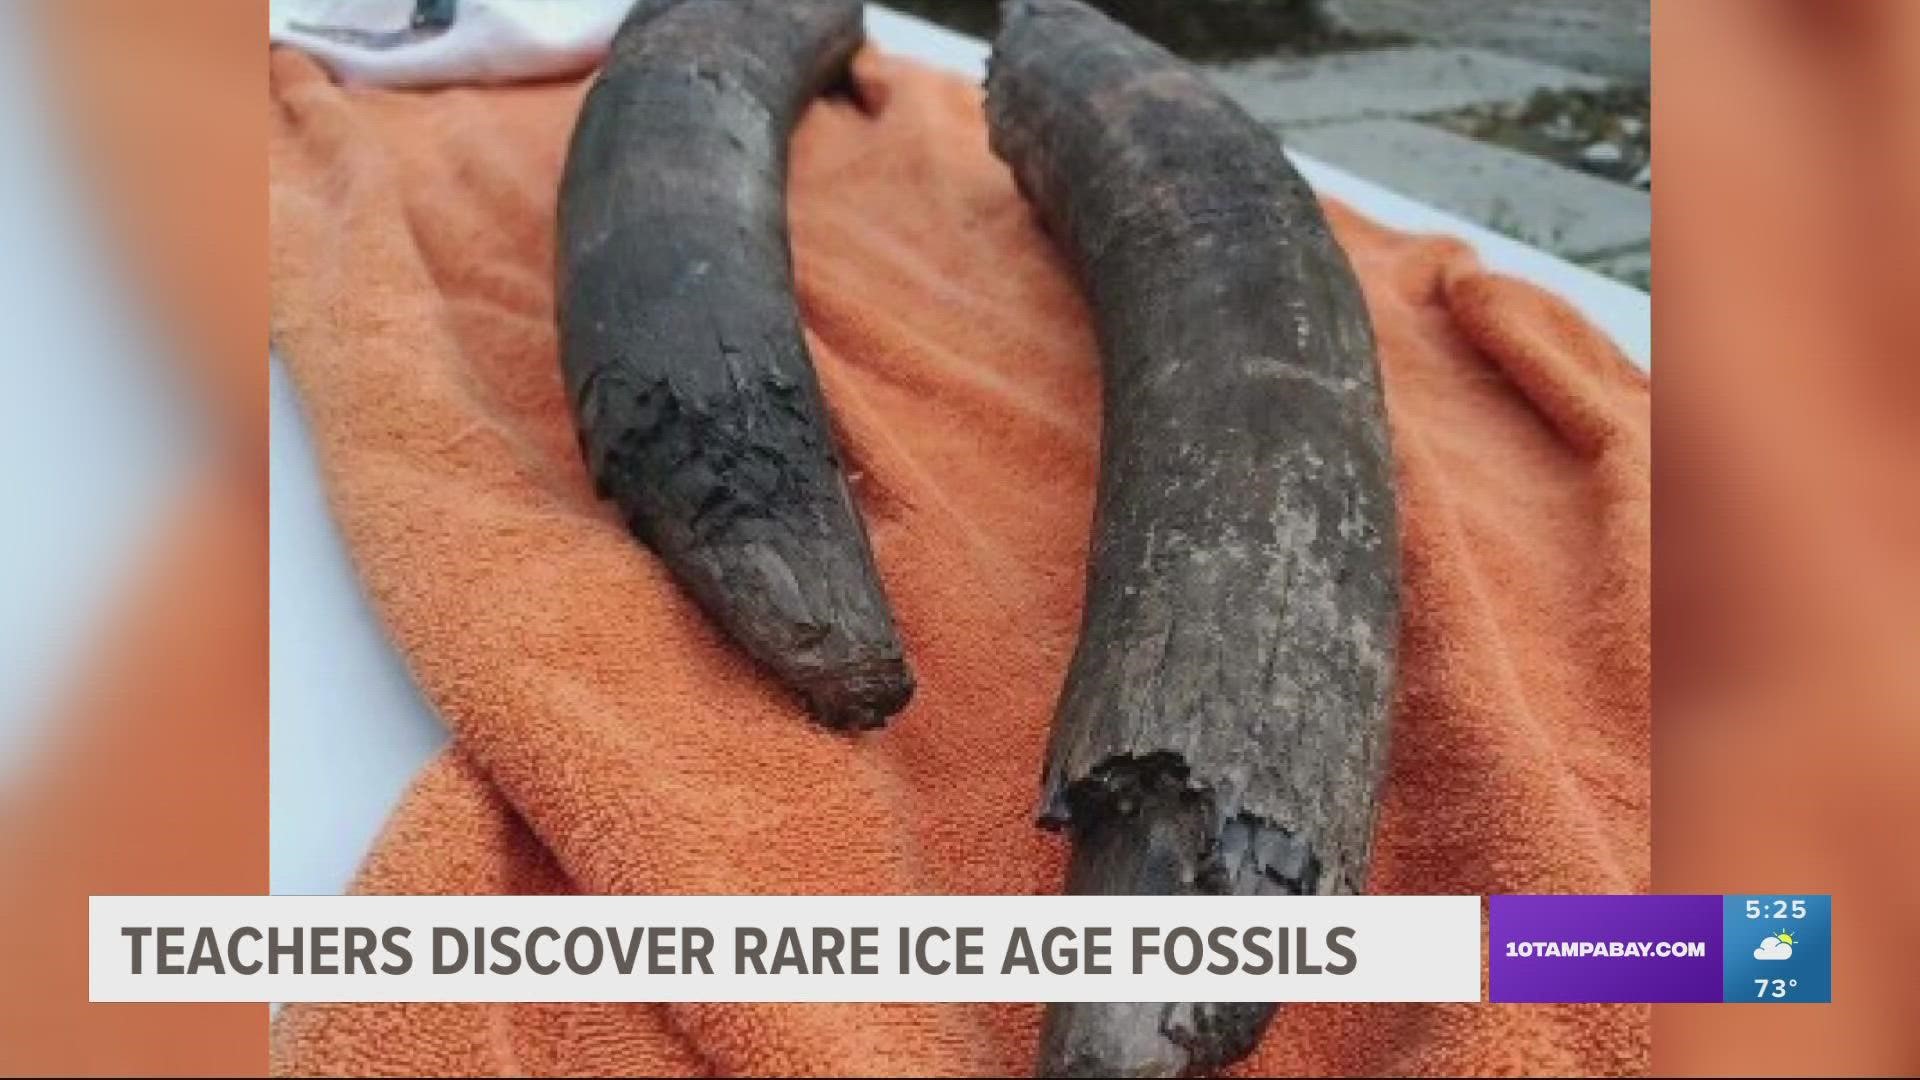 The finding comes after the duo was sourcing fossils for Admiral Farragut Academy's lower school paleontology Club.